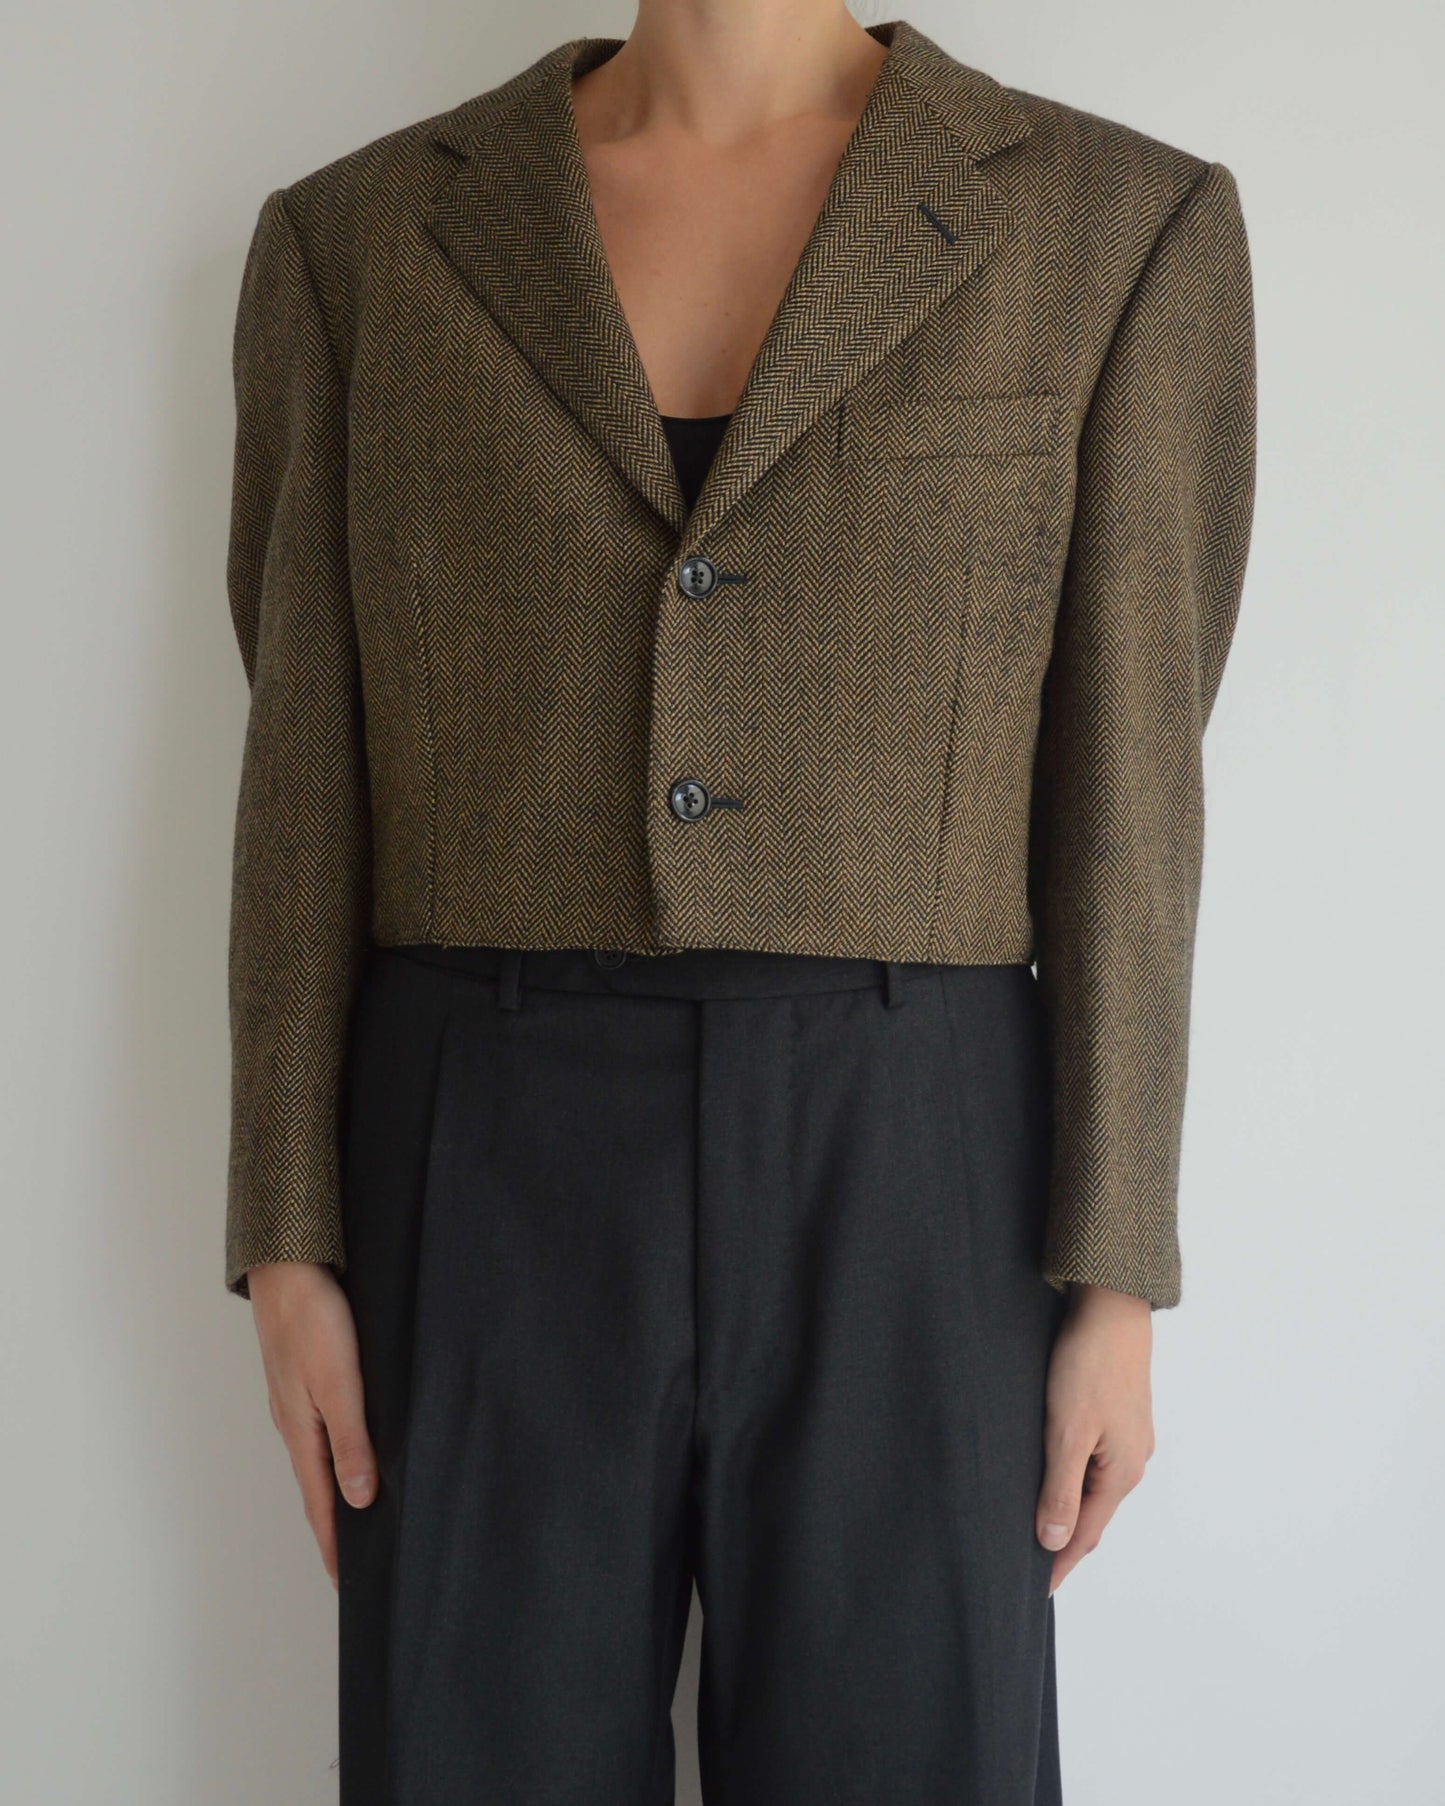 Mid Lenght Blazer - Perfect Fall (S/L)